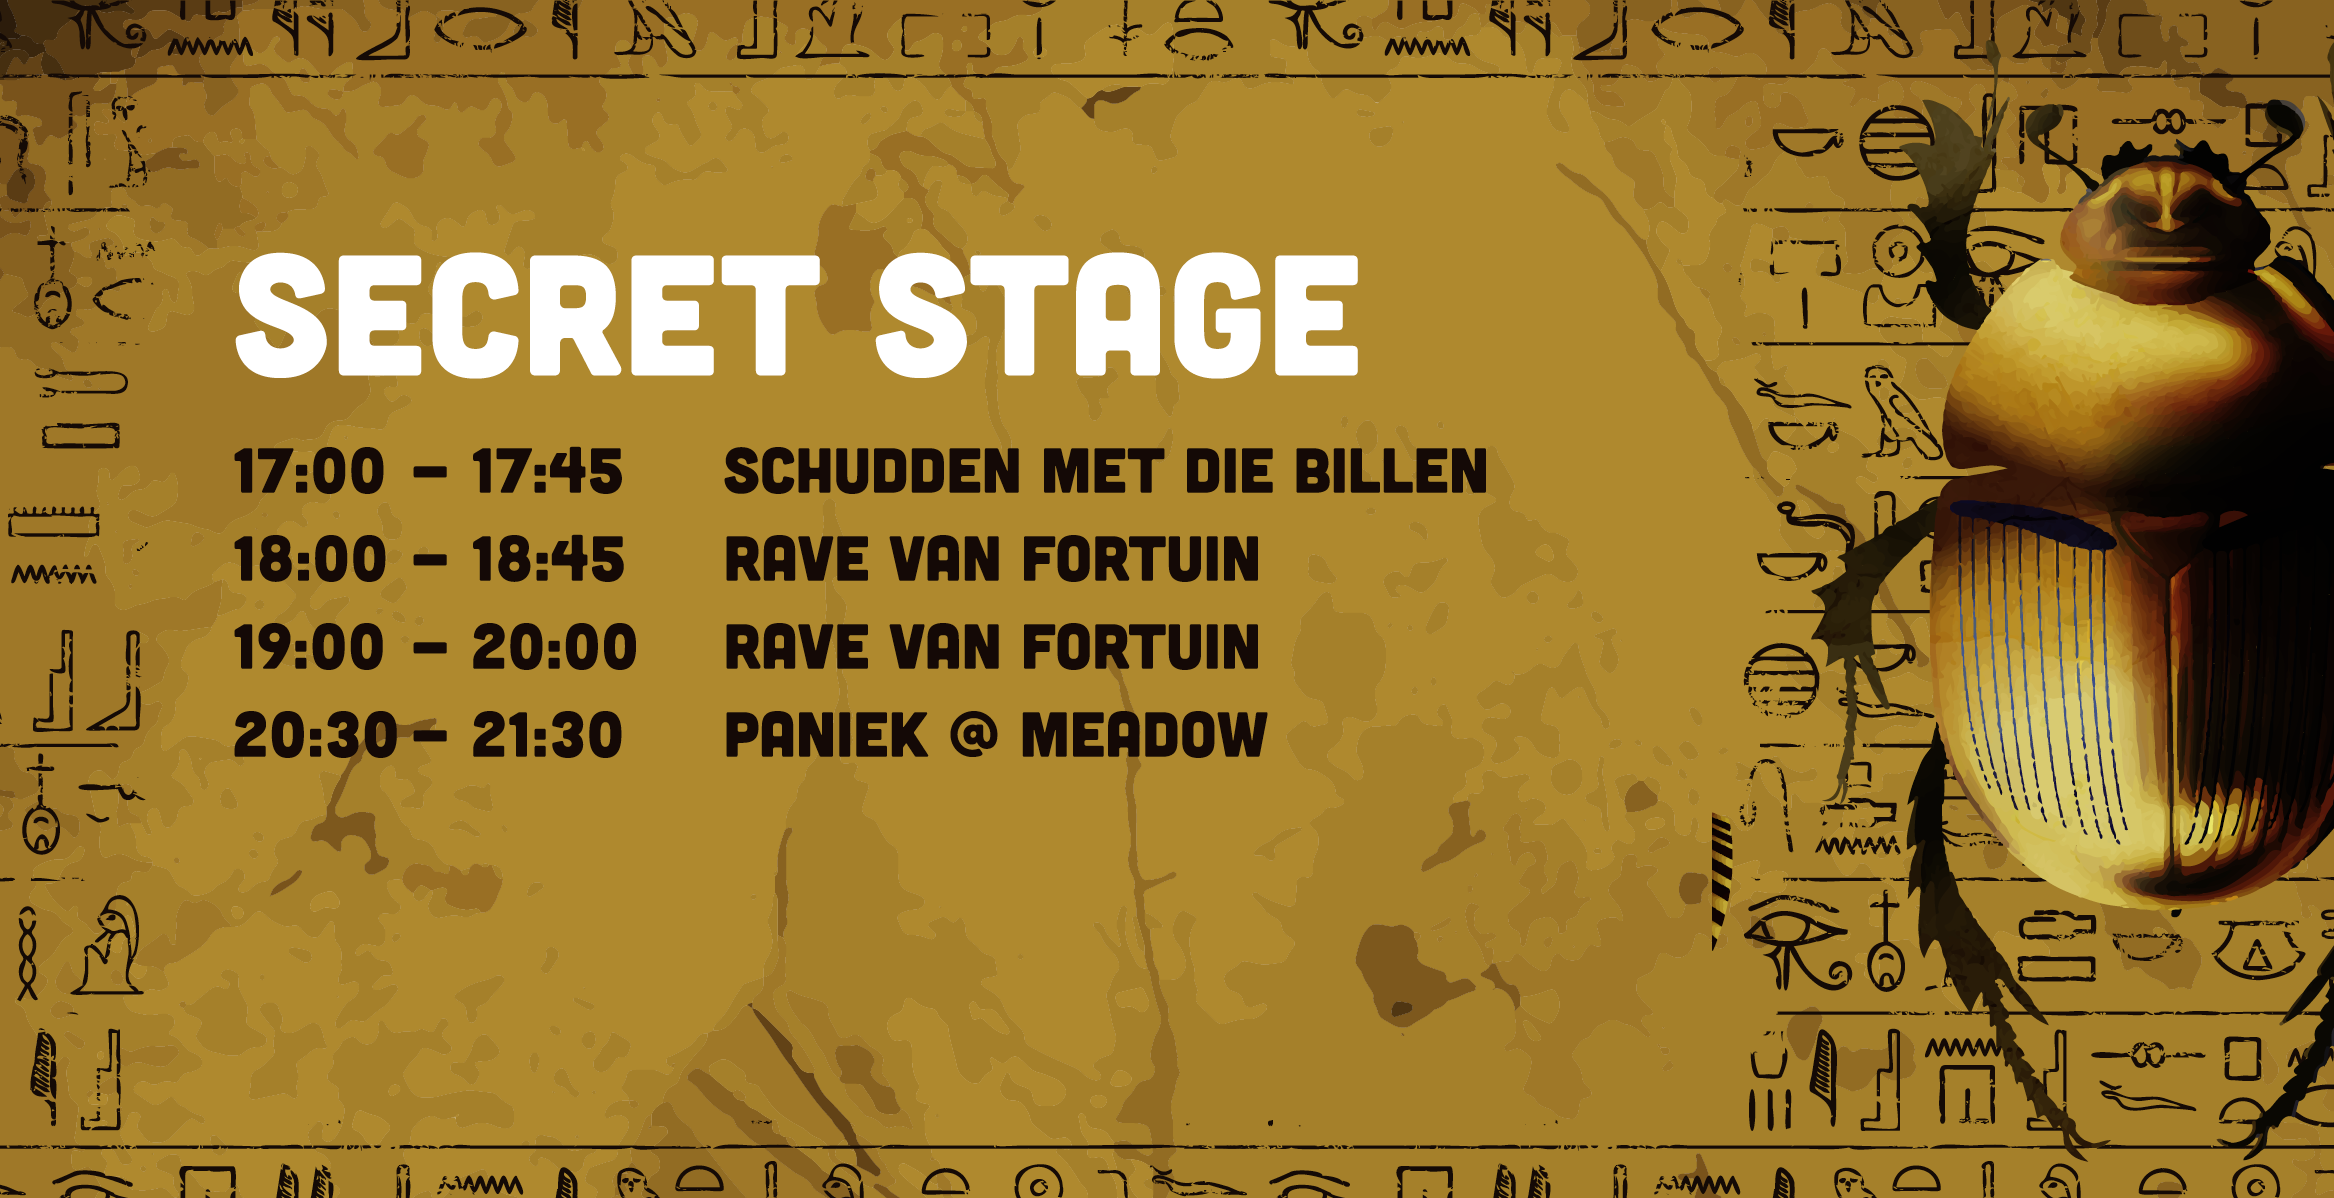 Timetable Meadow 2019 - Secret Stage